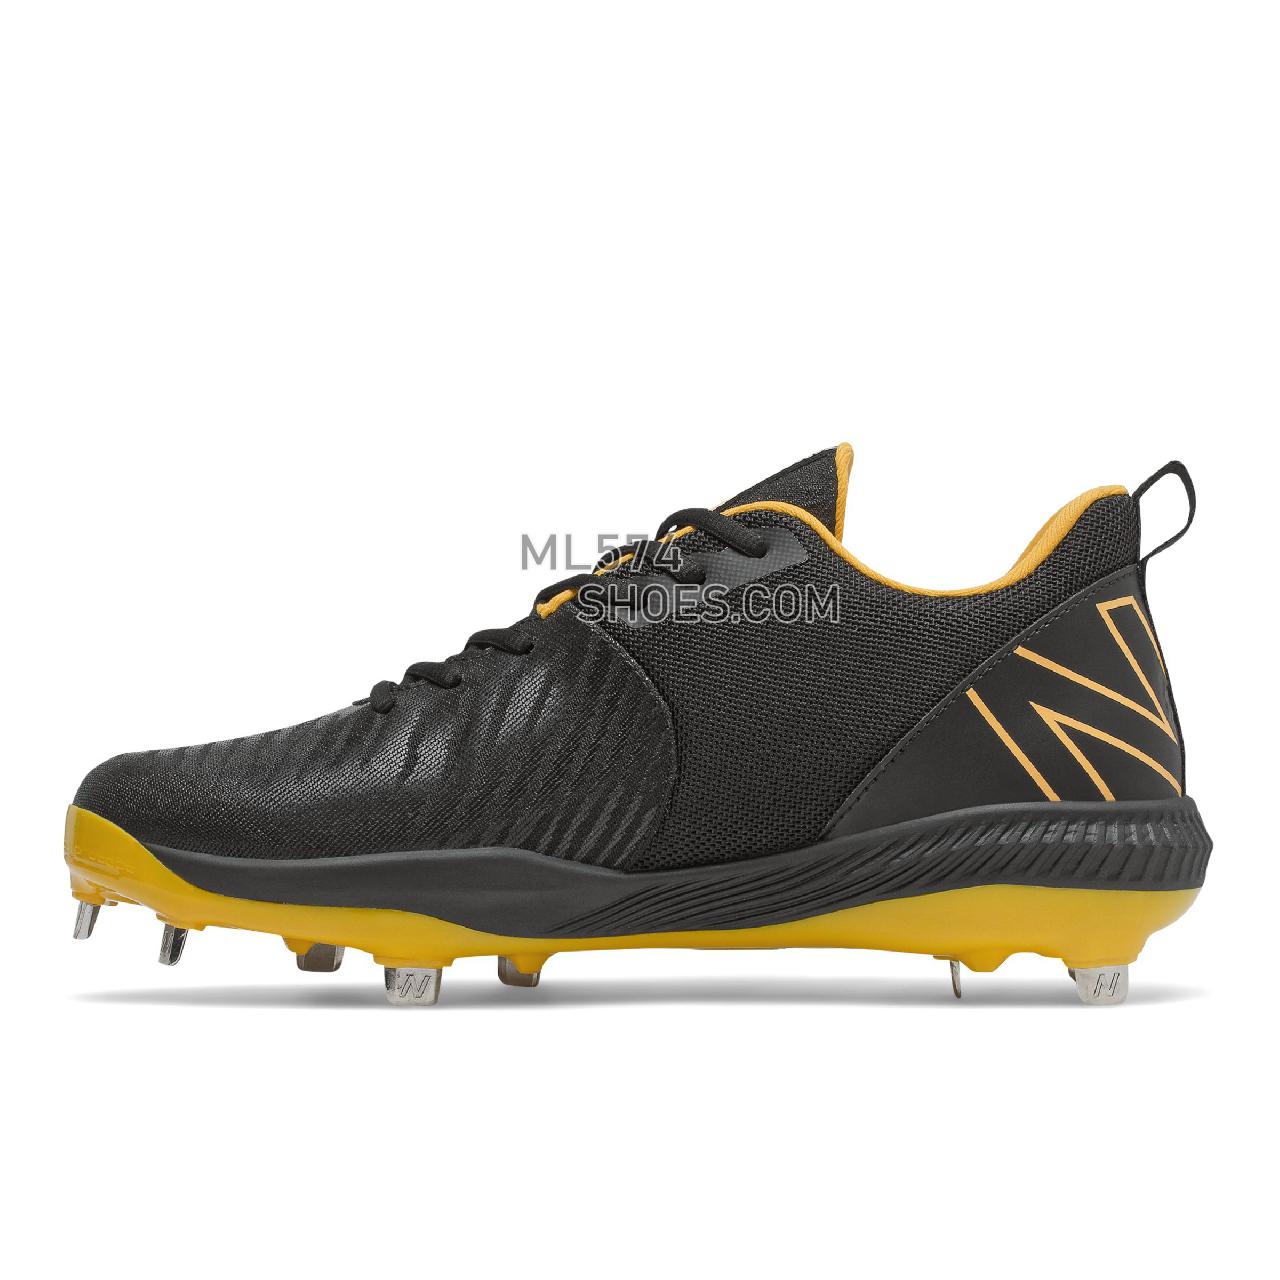 New Balance FuelCell 4040 v6 Metal - Men's Mid-Cut Baseball Cleats - Black with Yellow - L4040BY6